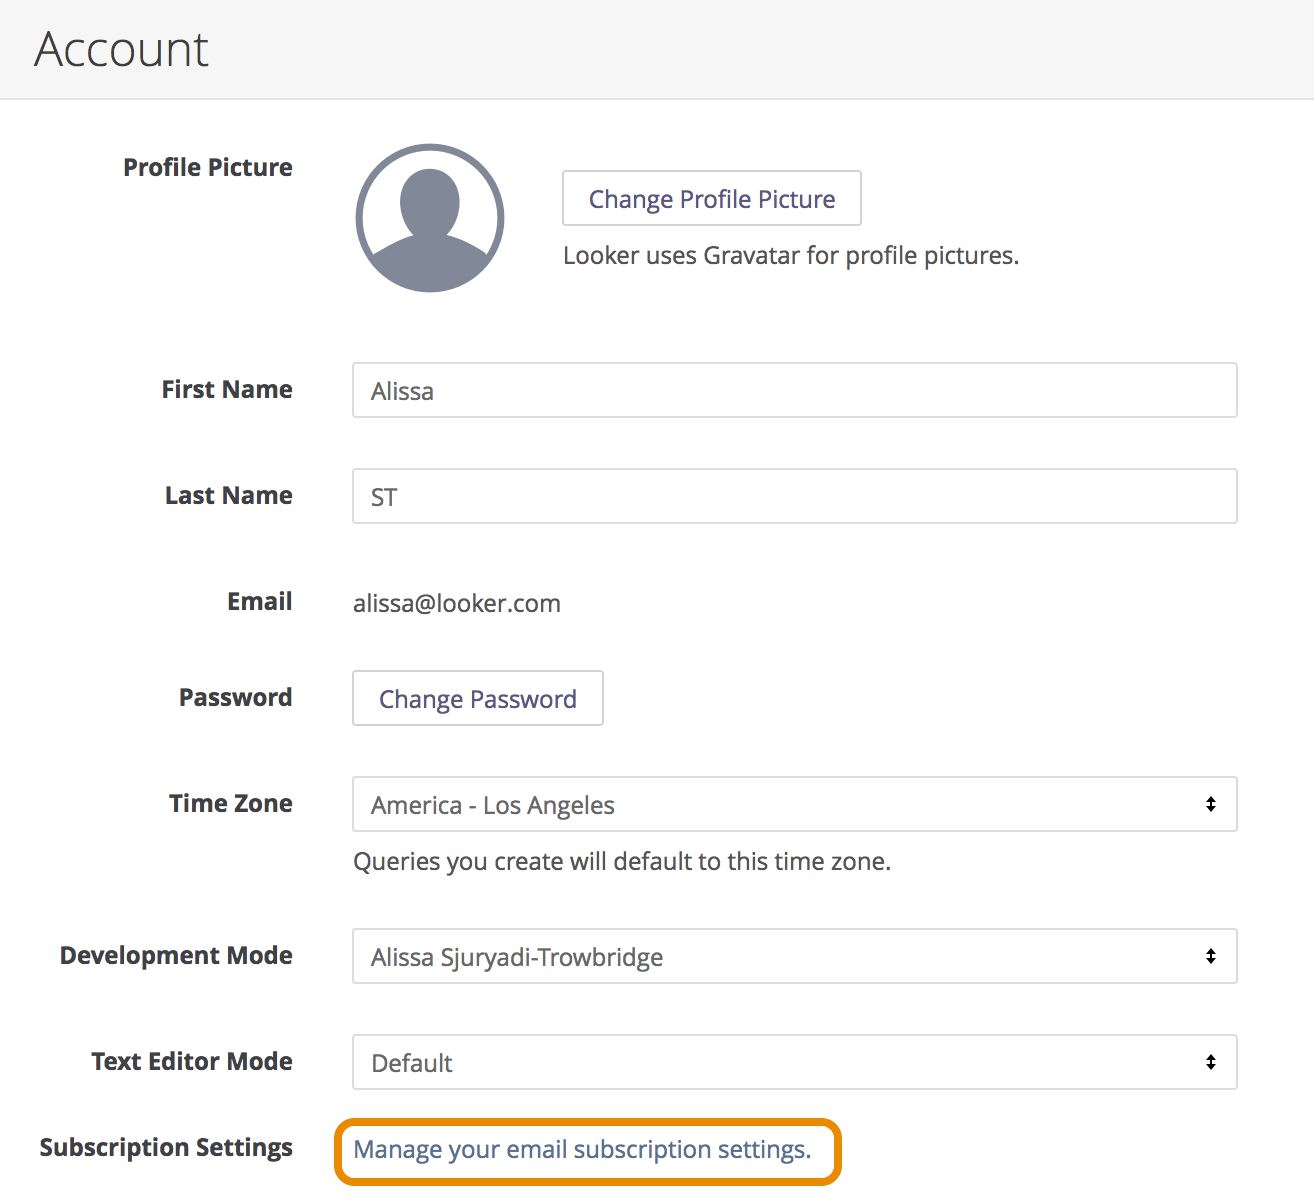 A screenshot of the Looker Account page. One of the fields is titled 'Subscription Settings', next to which is a link titled 'Manage your email subscription settings'.